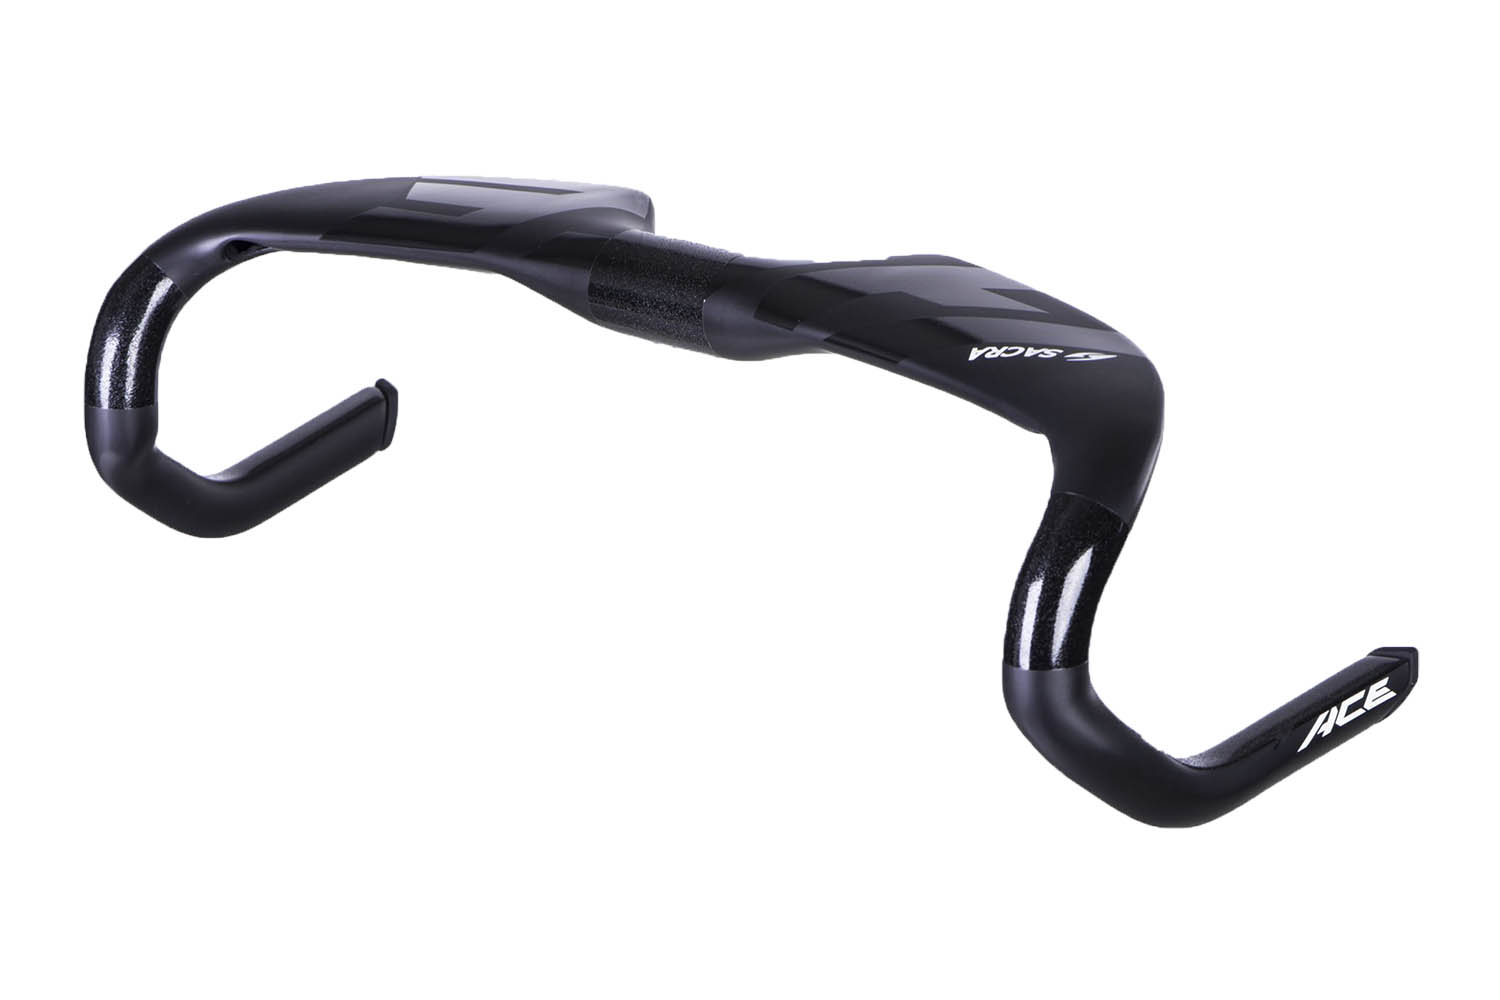 http://www.sacra-cycling.com/en/products/acehandle